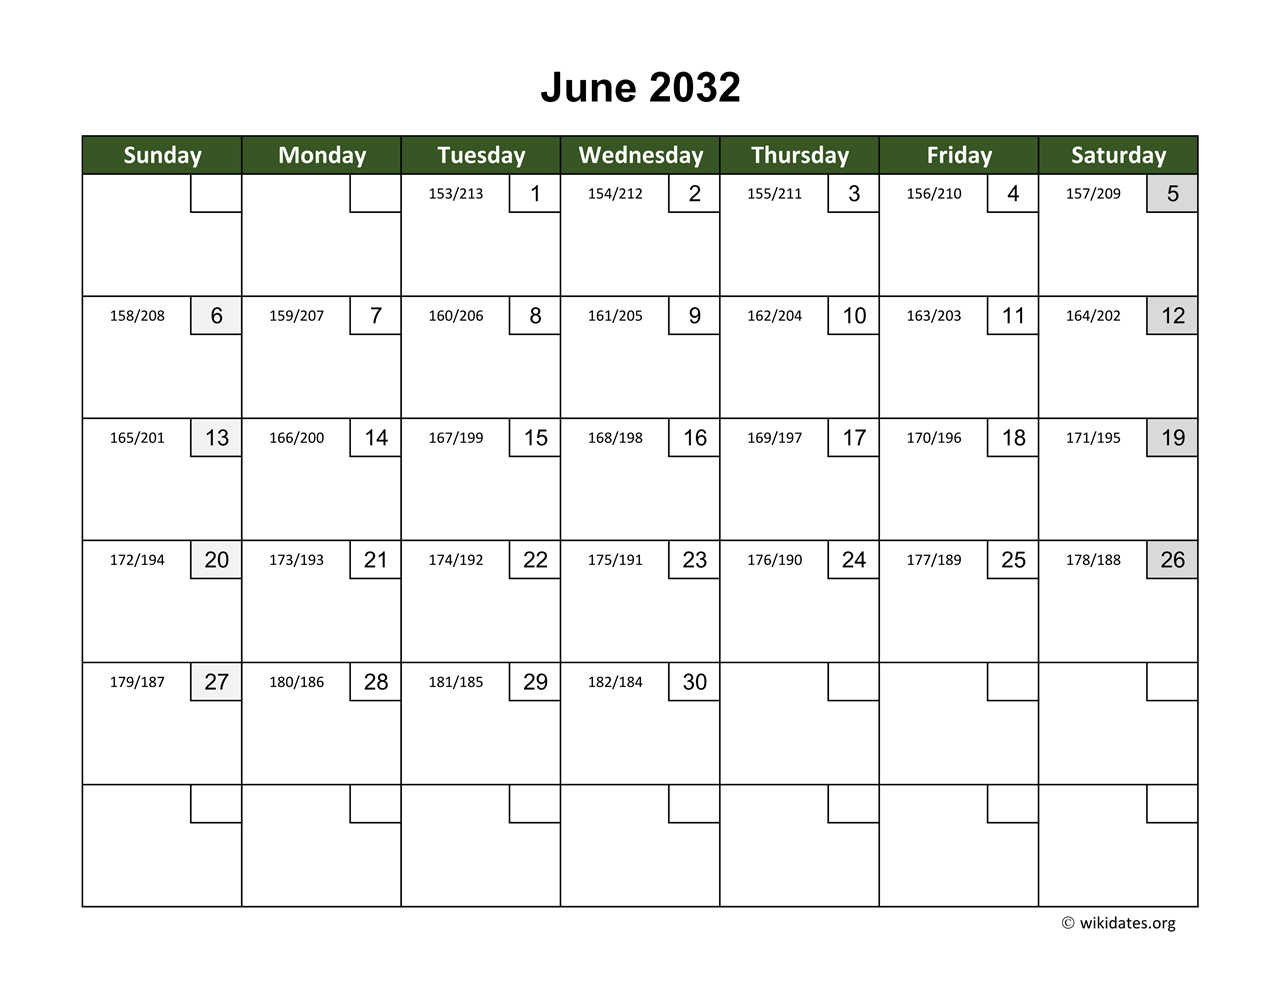 June 2032 Calendar with Day Numbers WikiDates org